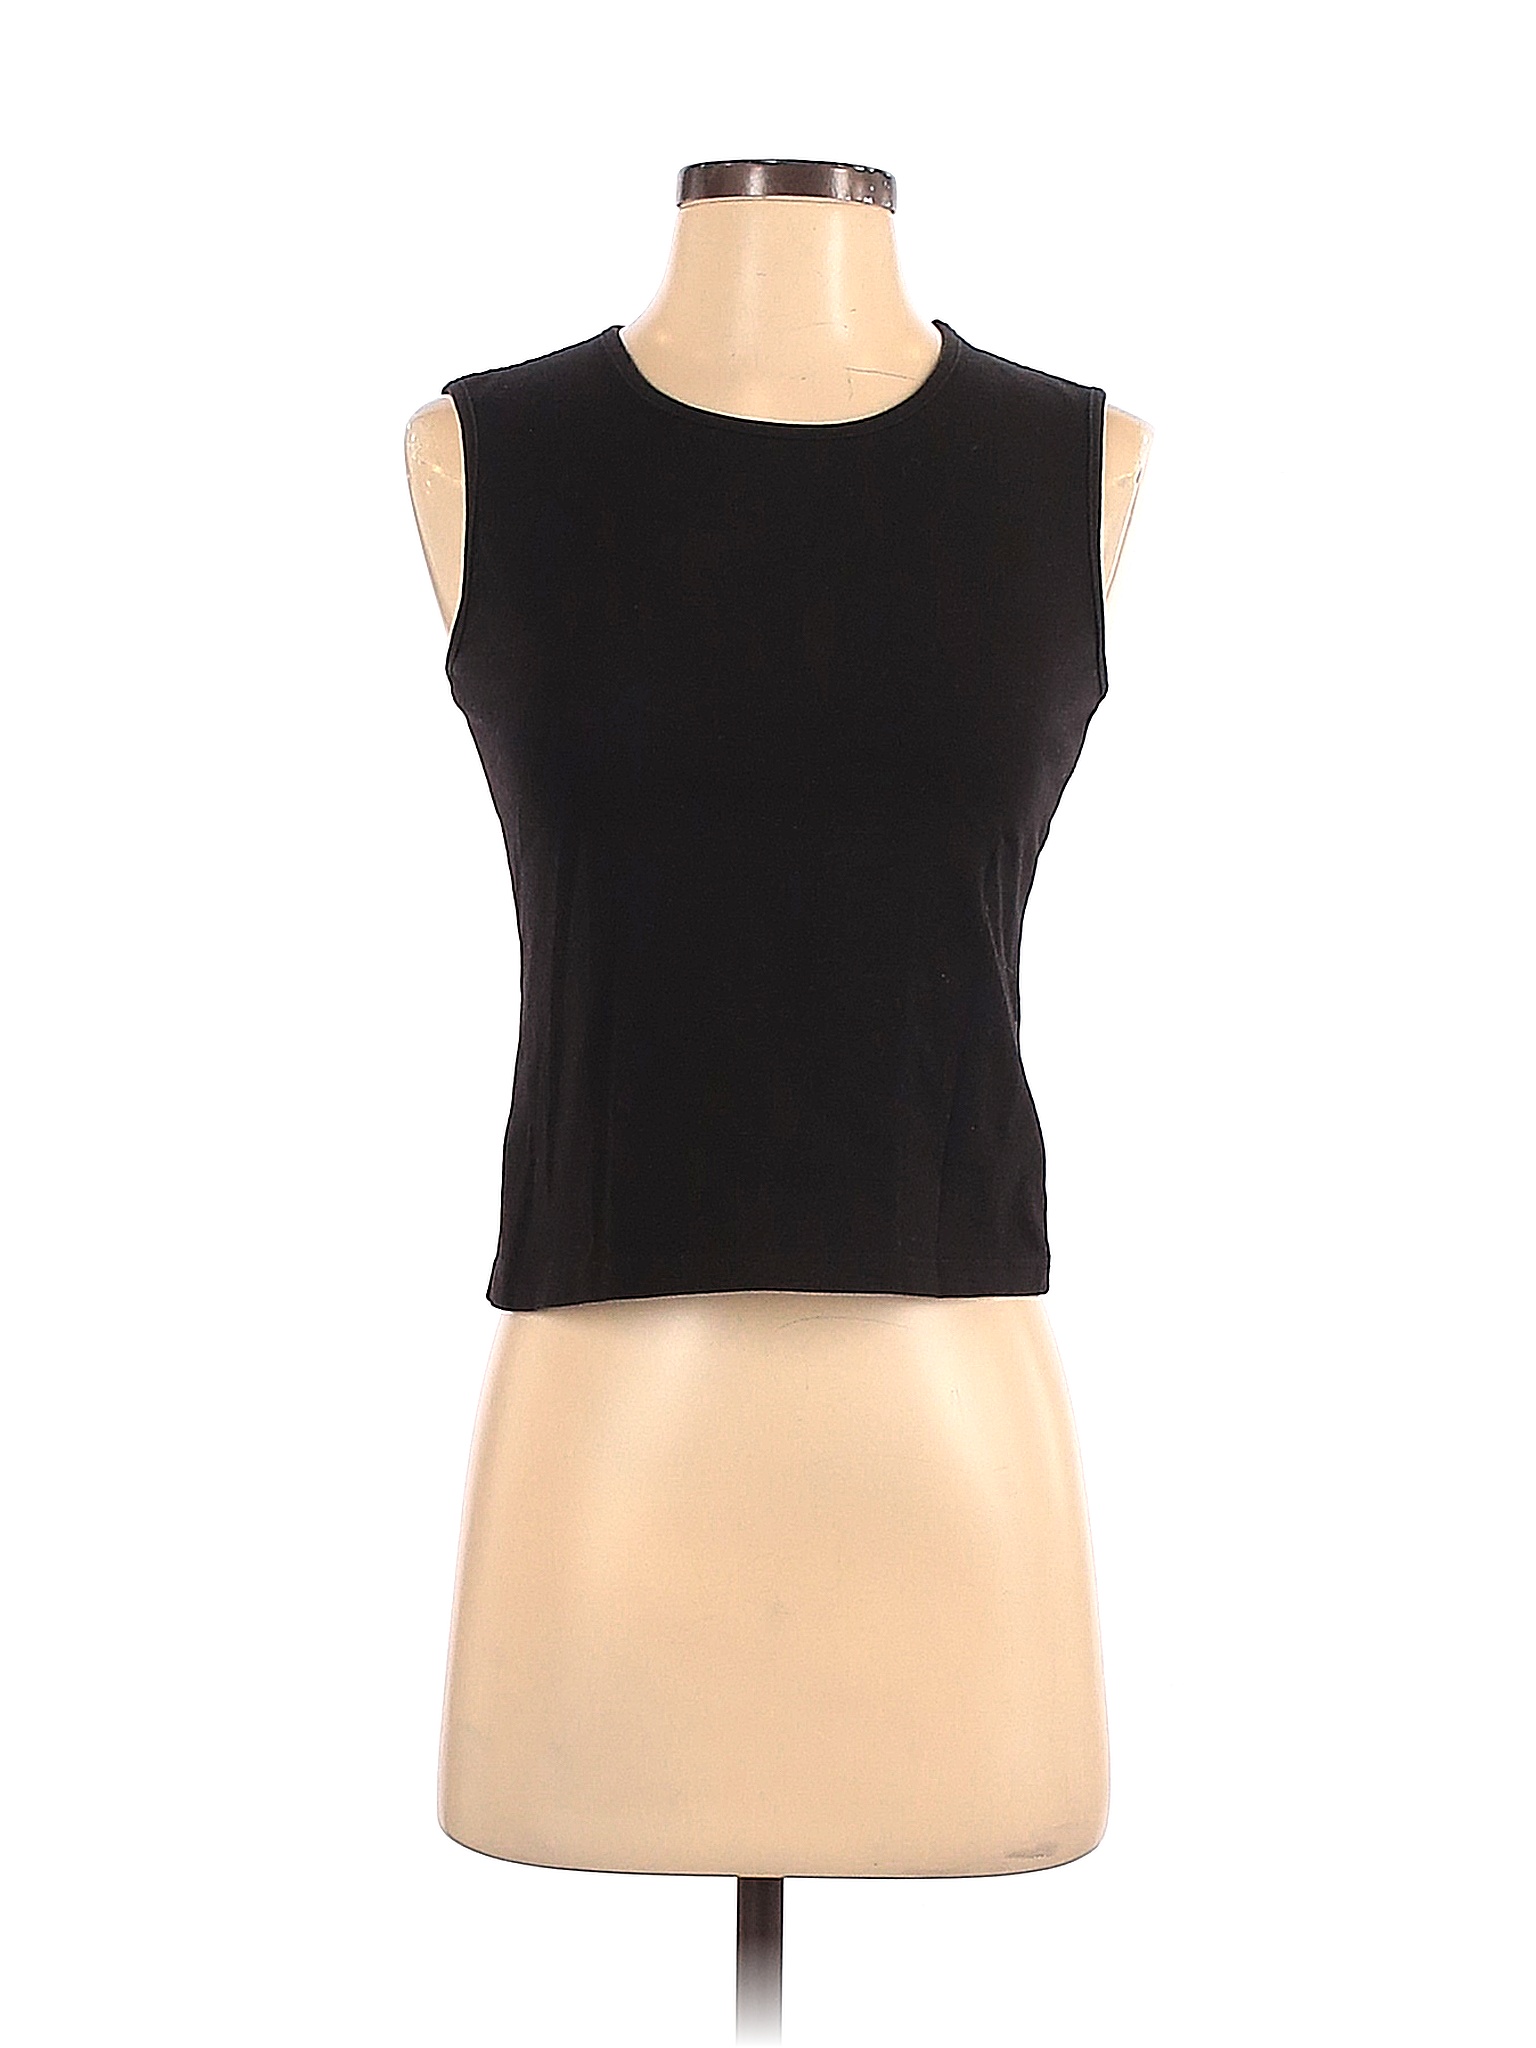 Azona A02 Solid Black Tank Top Size S - 72% off | thredUP